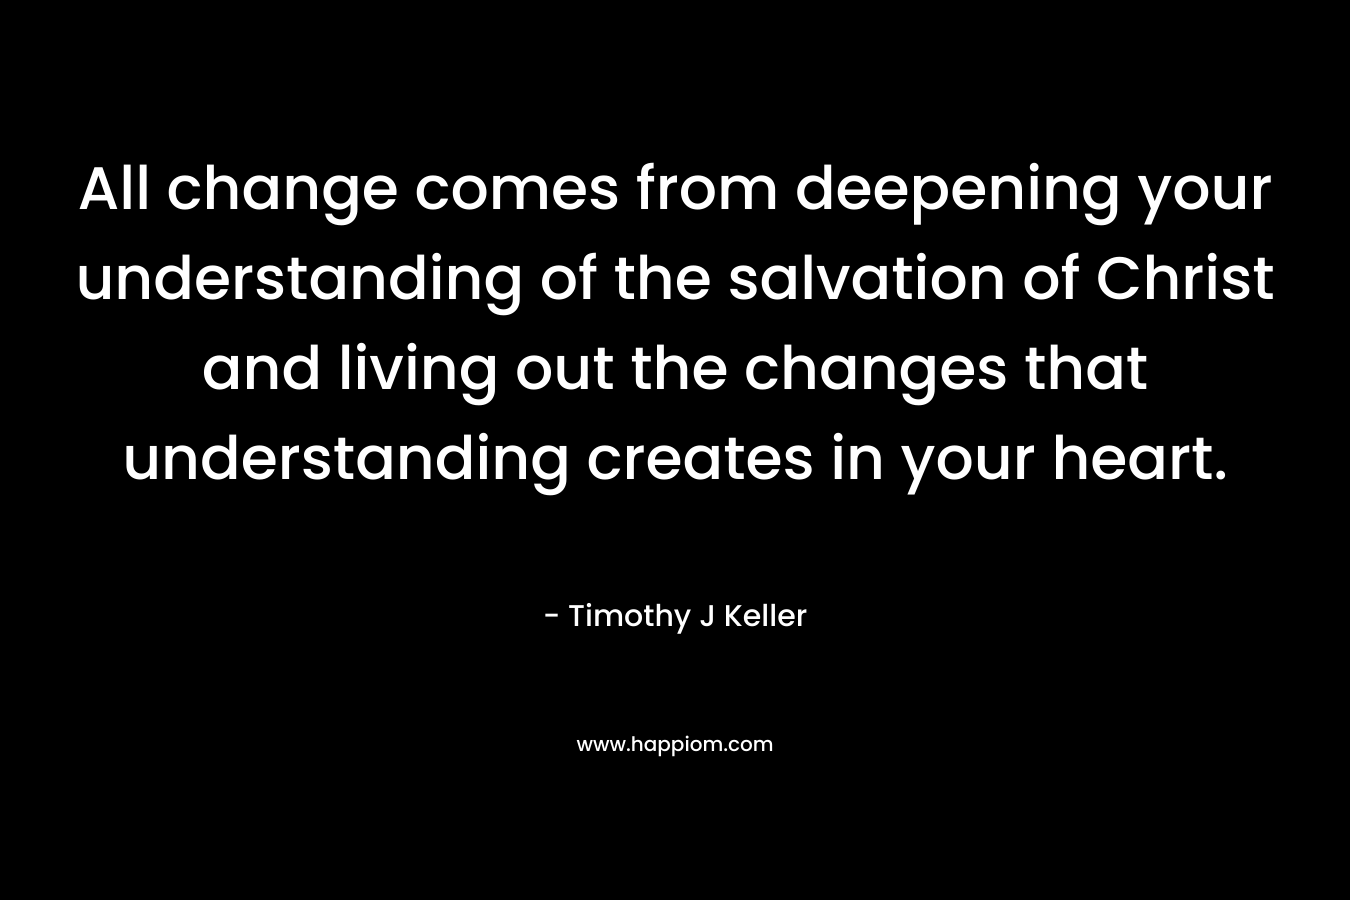 All change comes from deepening your understanding of the salvation of Christ and living out the changes that understanding creates in your heart.